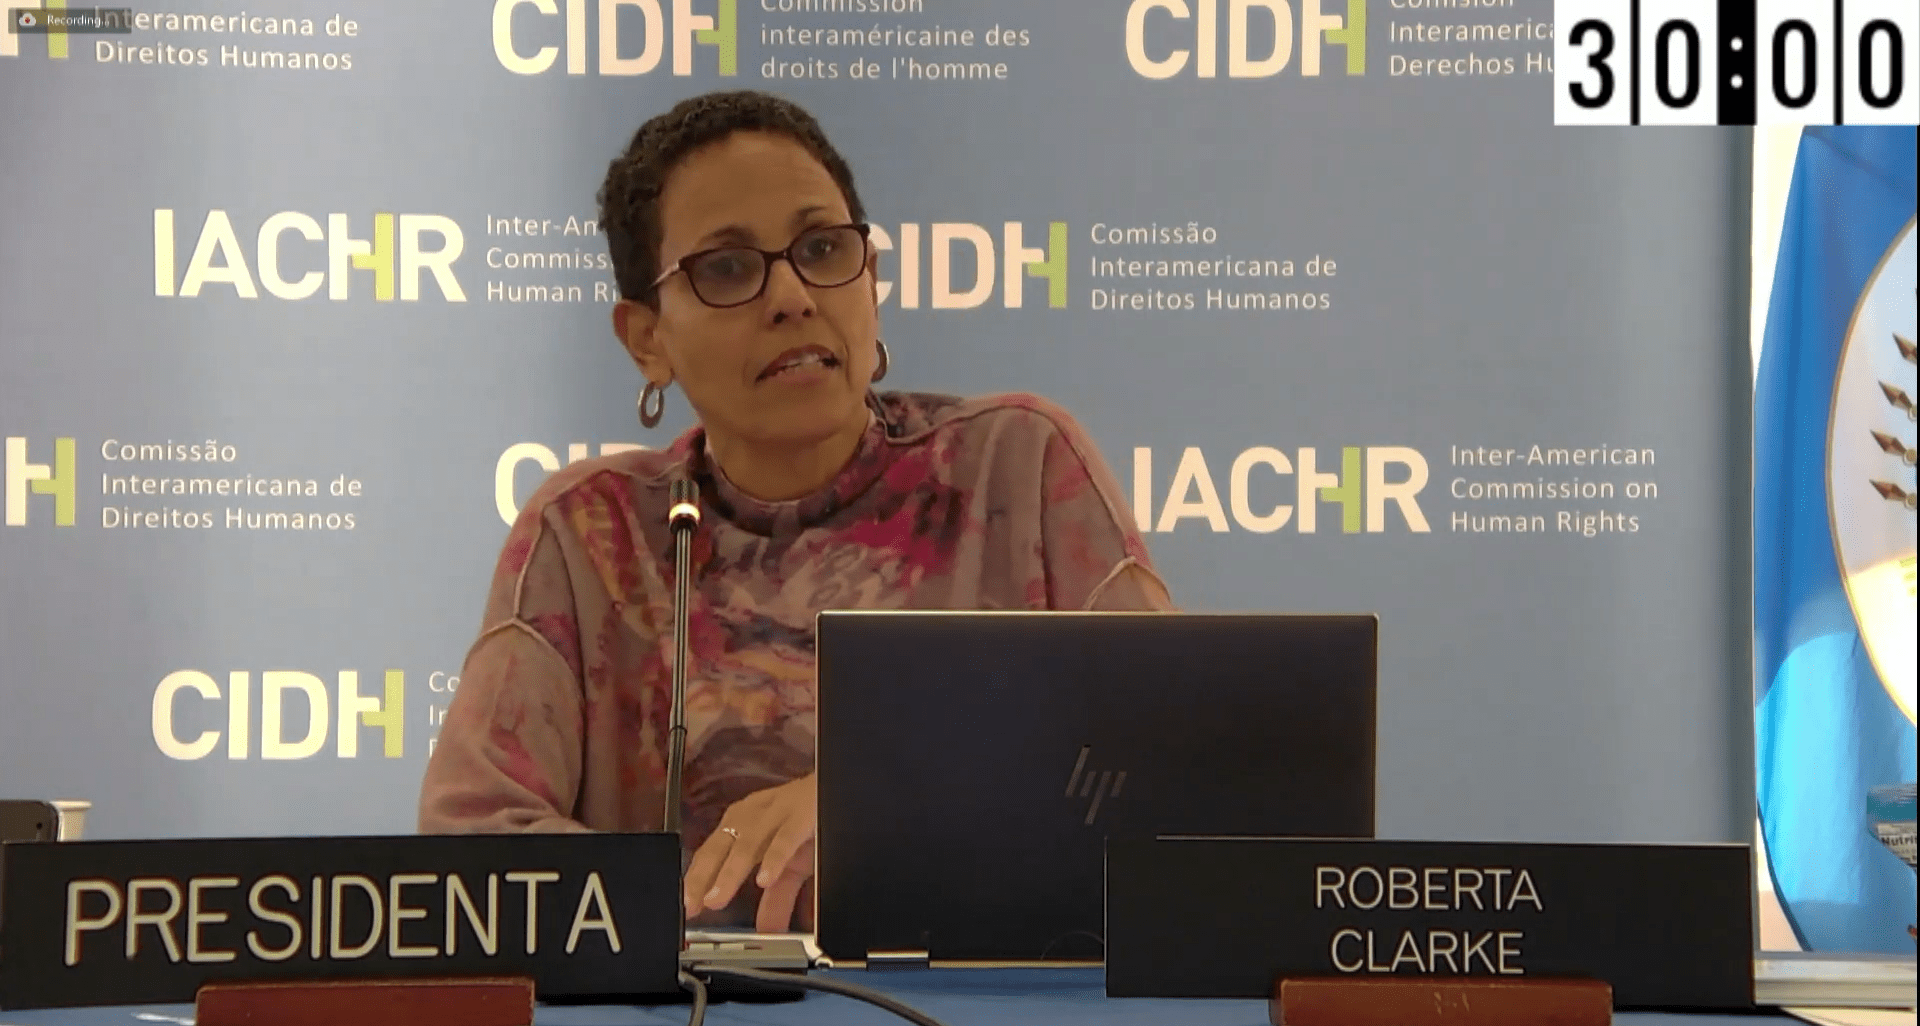 More Latin America Highlights: Center Testifies About Agrochemicals' Harm on Reproductive Health